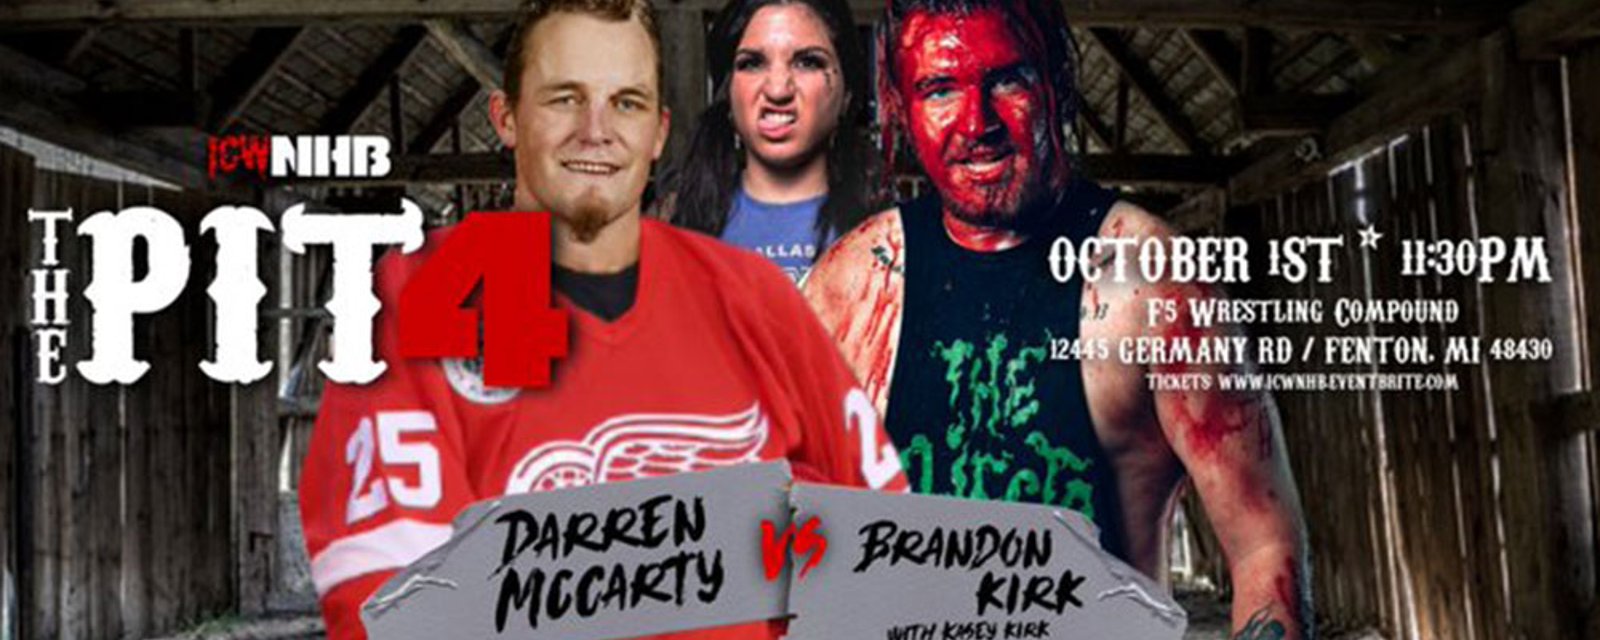 Four time Stanley Cup winner Darren McCarty will make his Pro Wrestling debut next month!